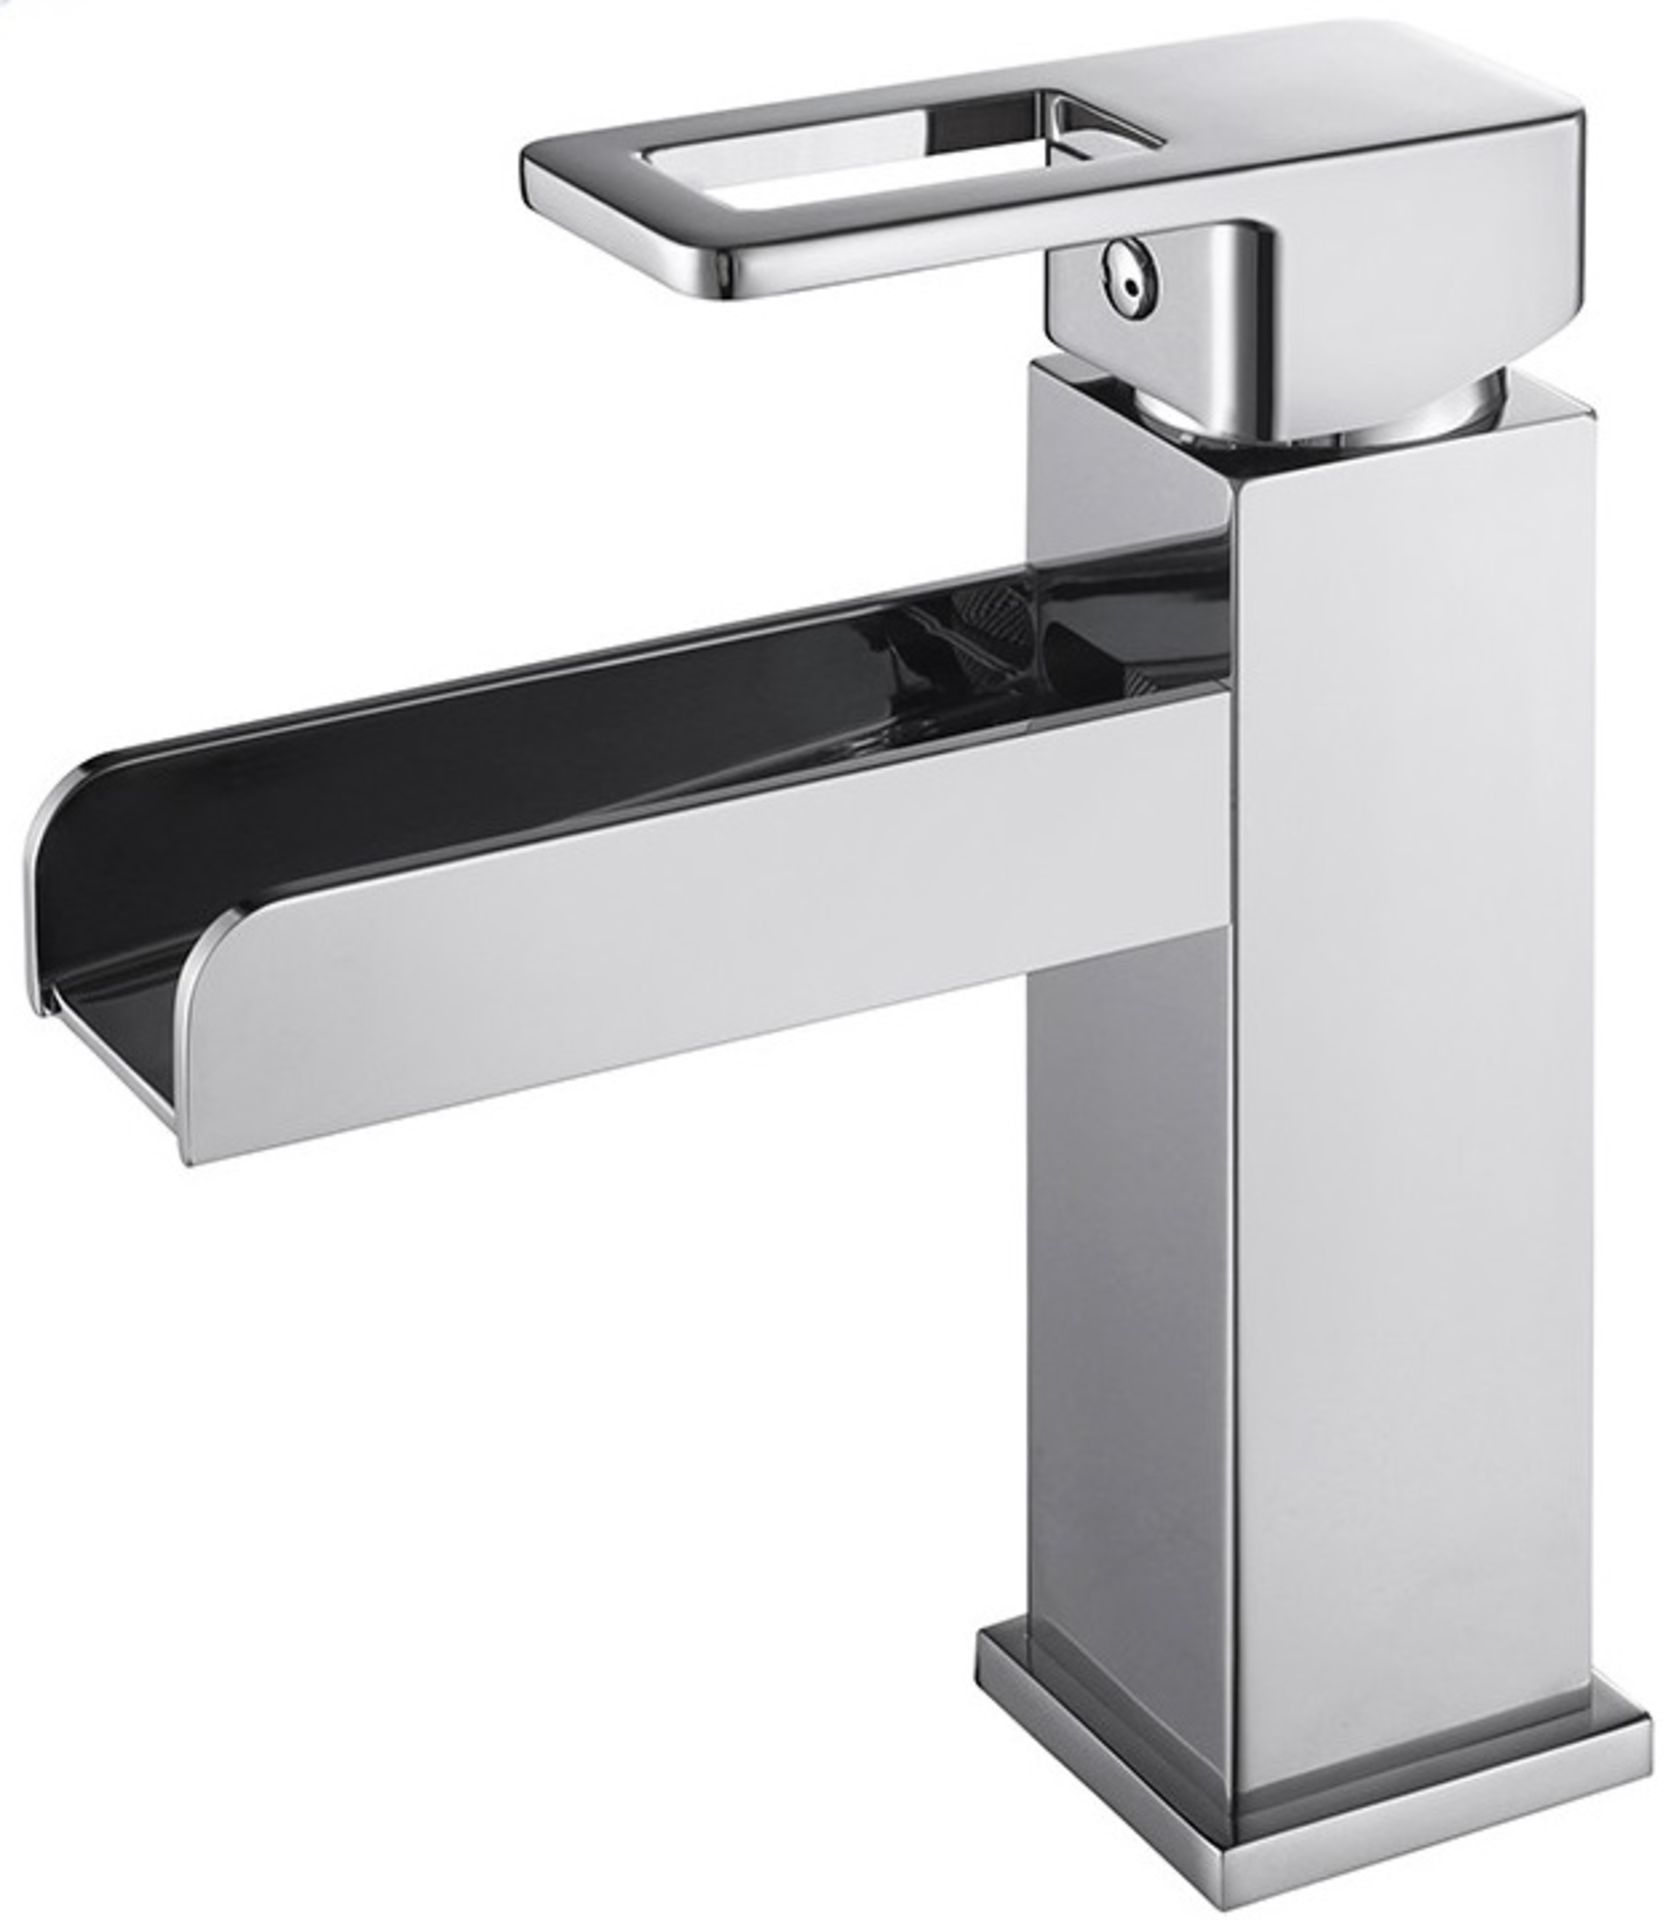 1 x High Quality Chromed Solid Brass Single Handle Basin Mixer - Brand New & Boxed - Ref: GAT1-8/AF3